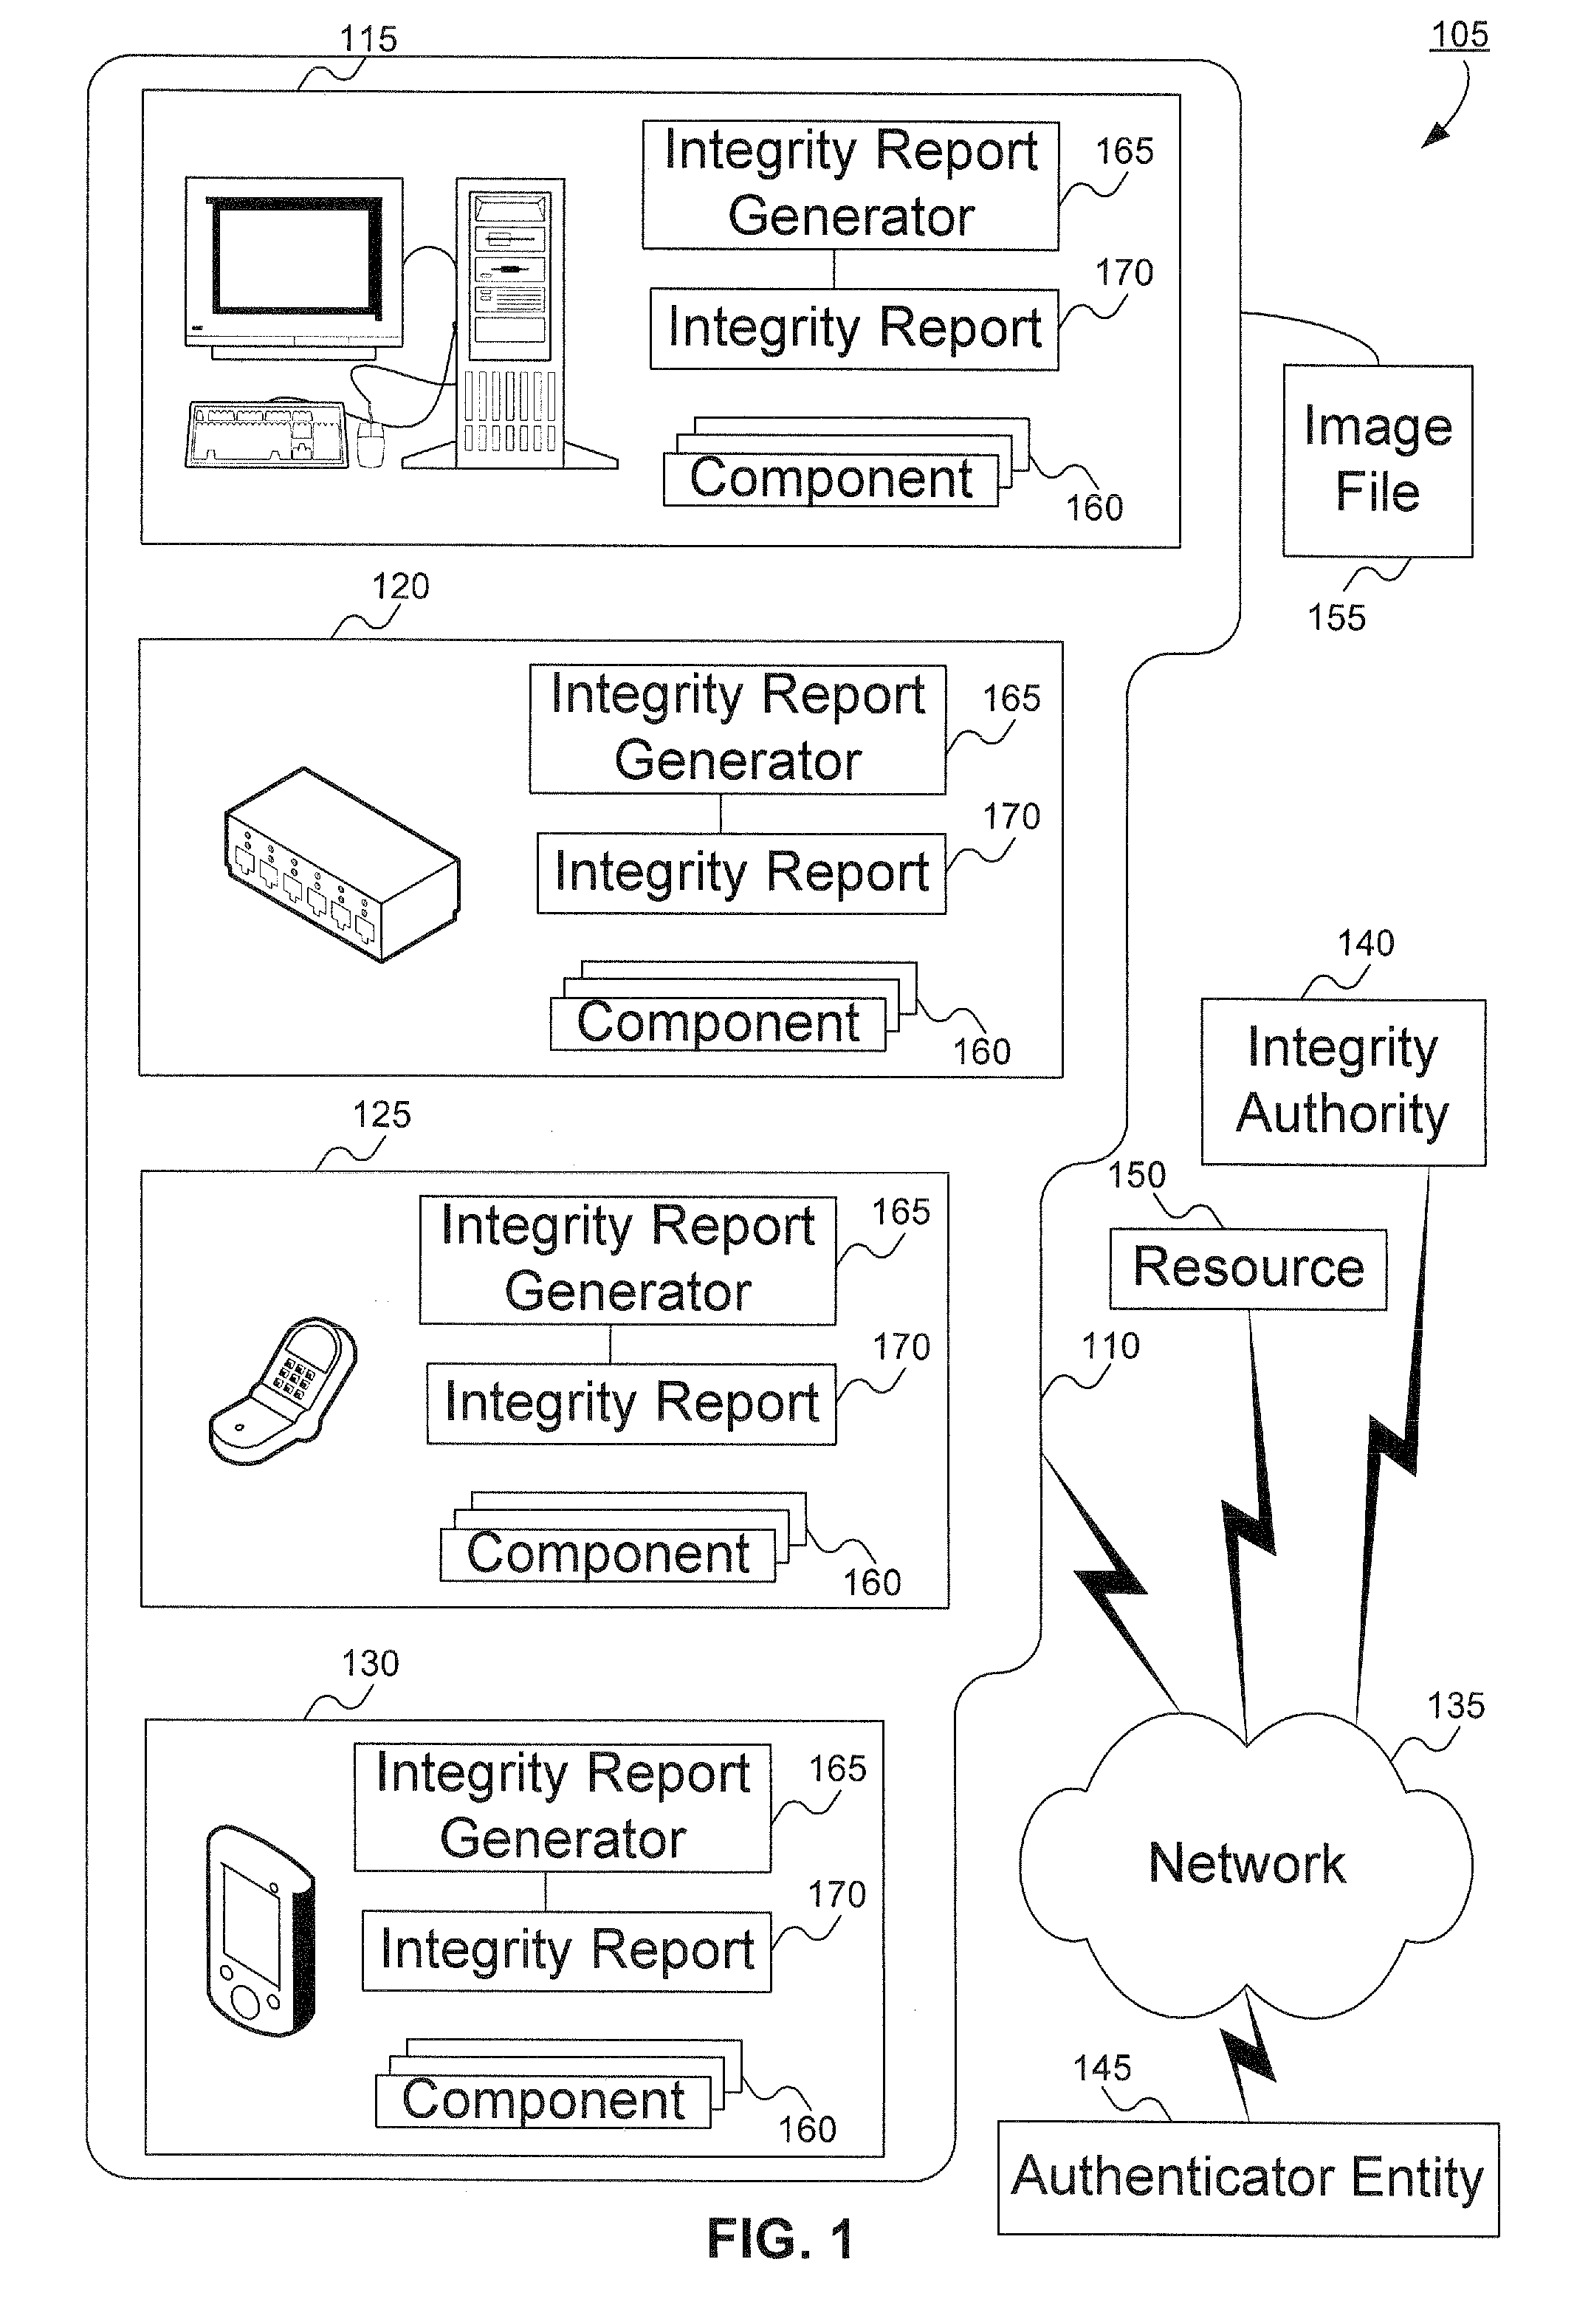 Method to verify the integrity of components on a trusted platform using integrity database services